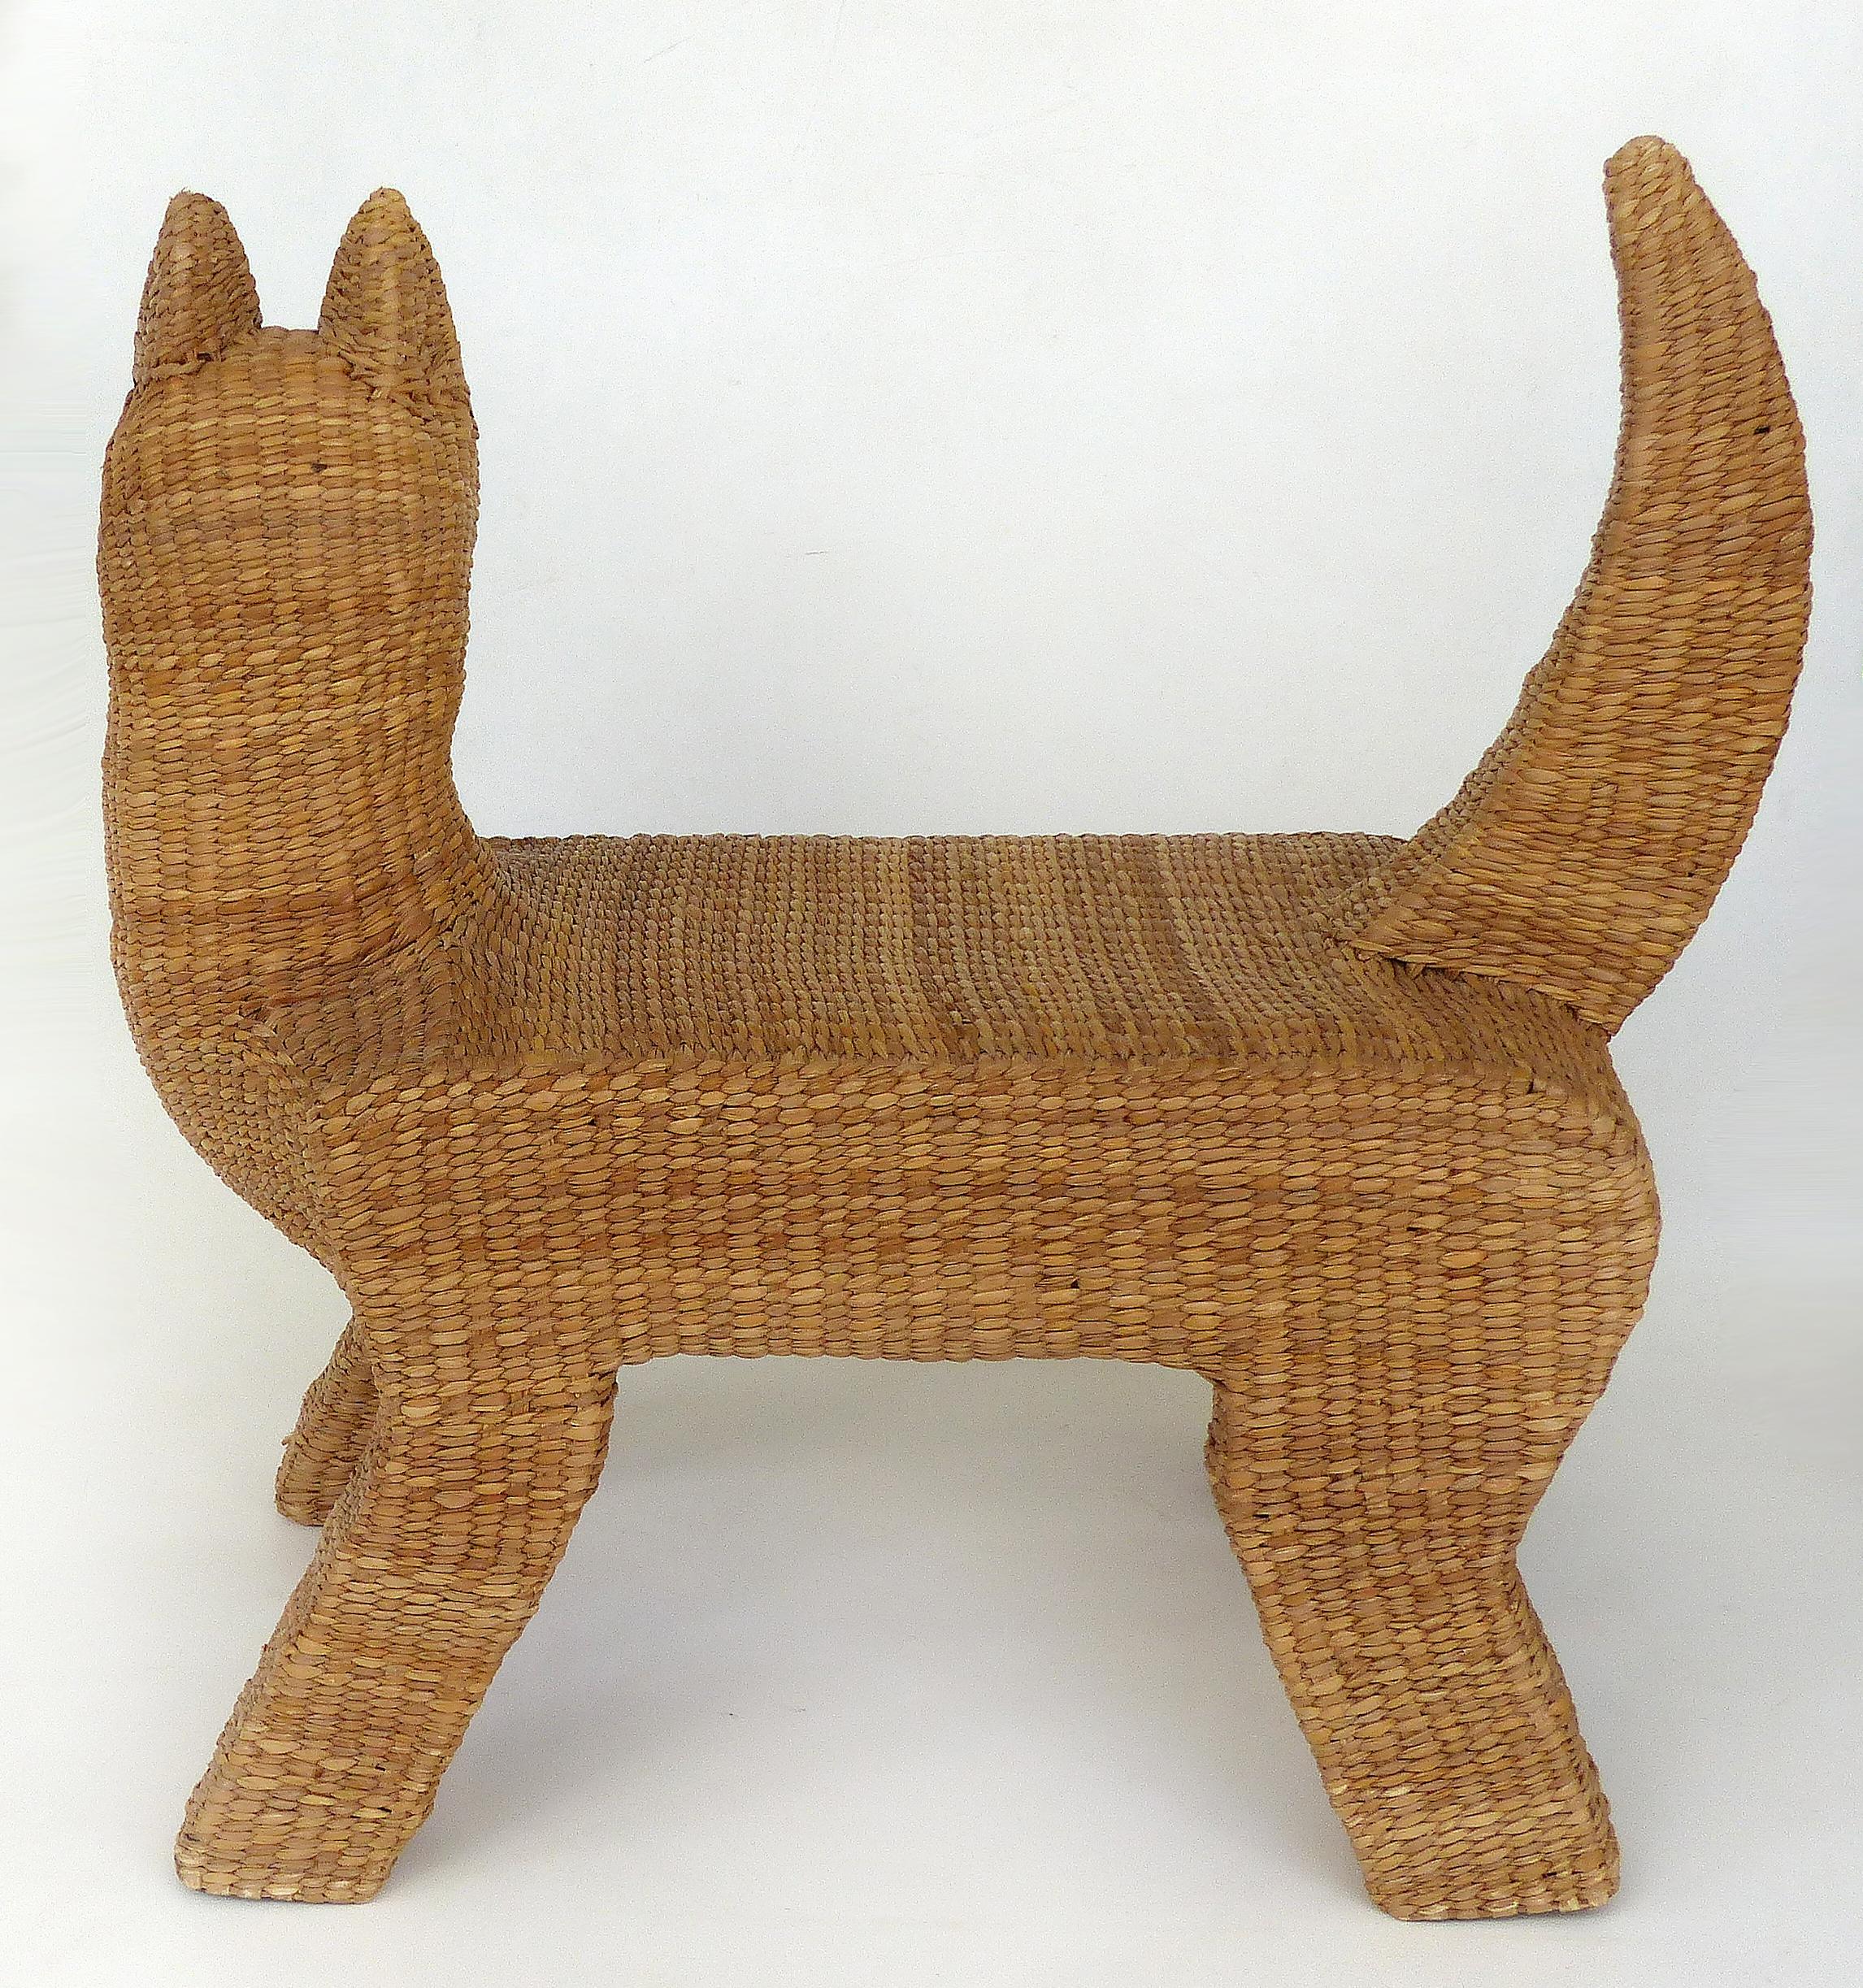 Mario Lopez Torres Coyote Bench, Mid-Century Modern Woven Reed & Copper, Mexico 1